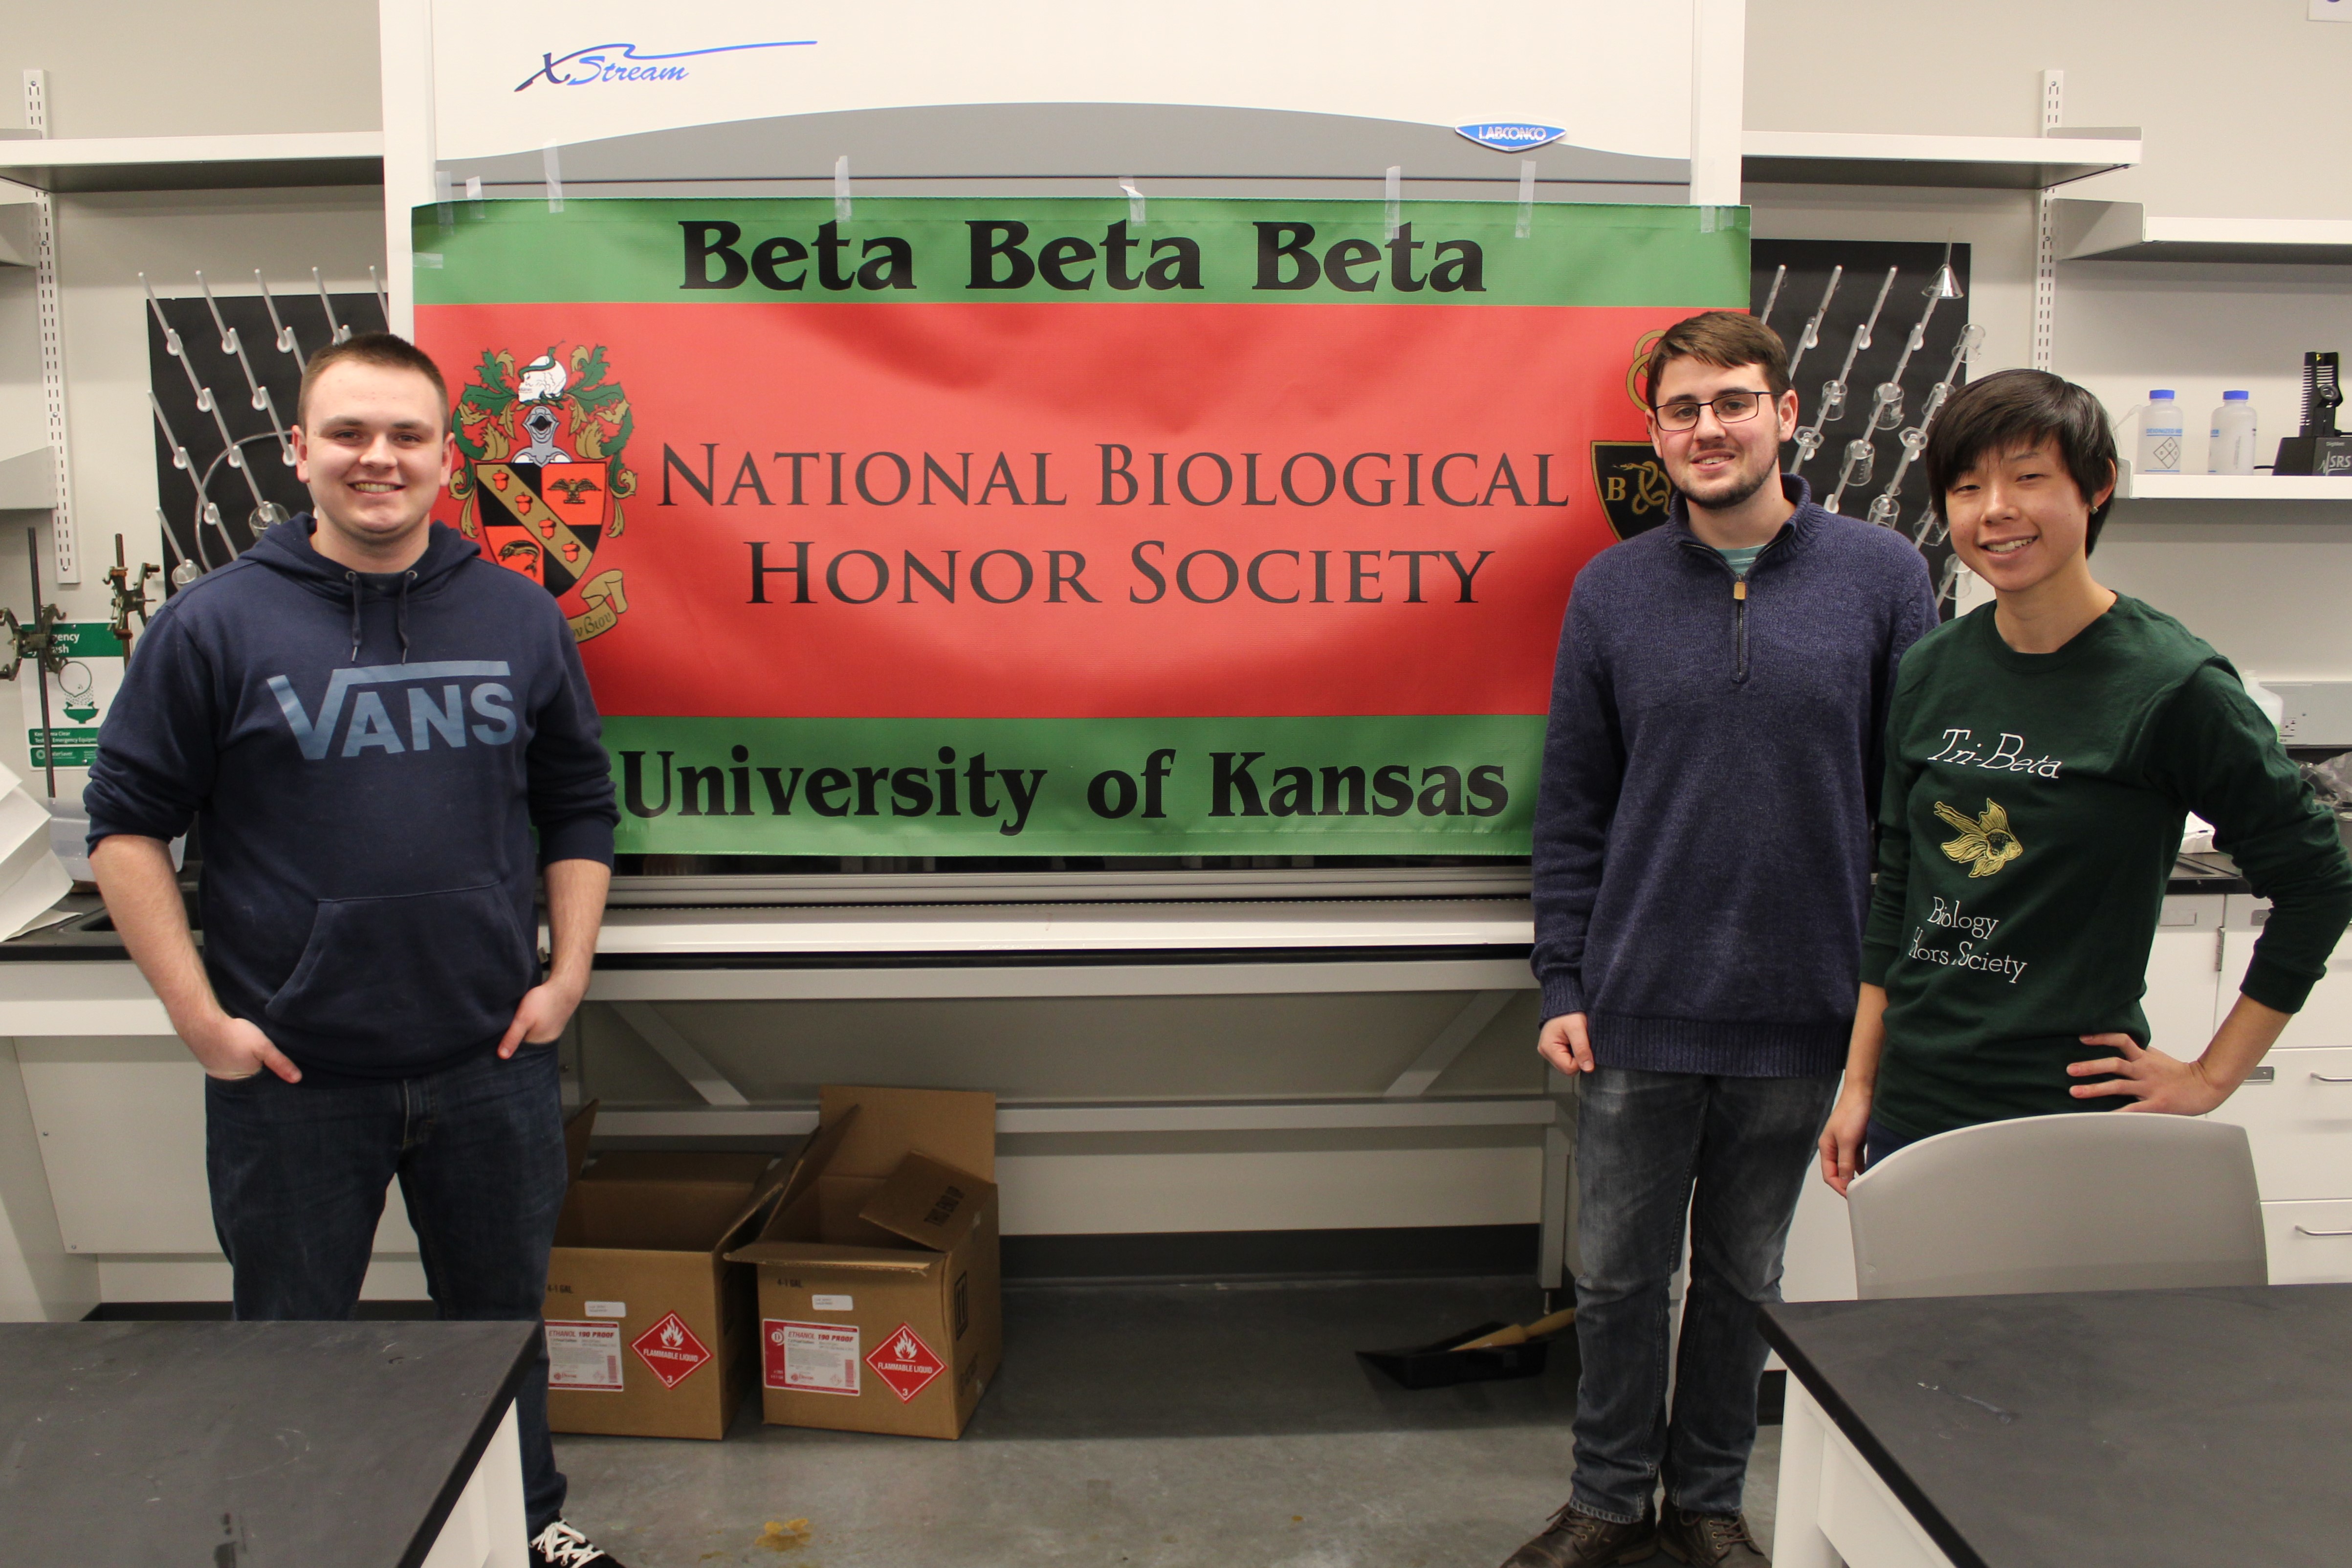 Beta Beta Beta National Biological Honor Society poster with three students standing beside it.